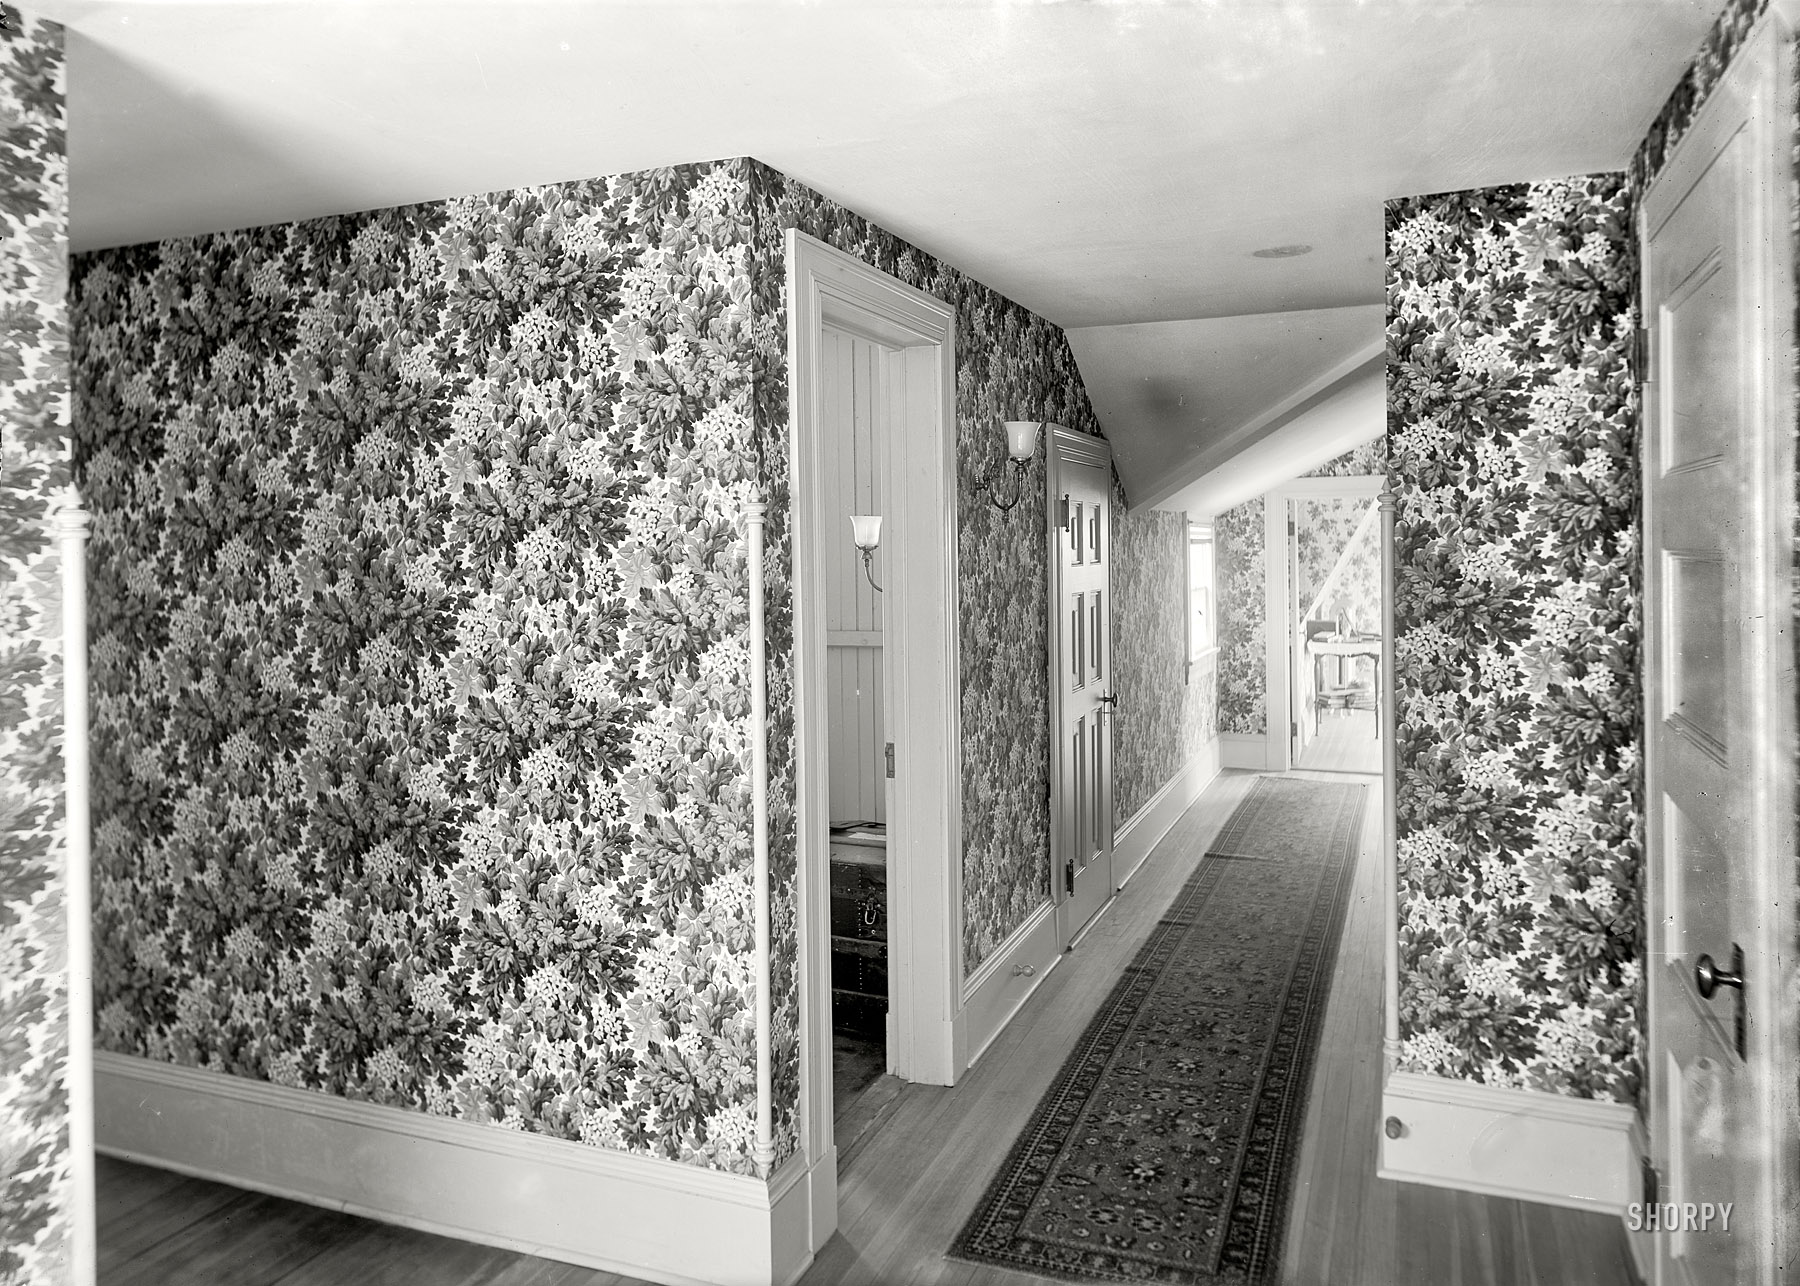 Circa 1910. "Hall with floral wallpaper, probably in a clubhouse, New York." 8x10 inch dry plate glass negative, Detroit Publishing Company. View full size.